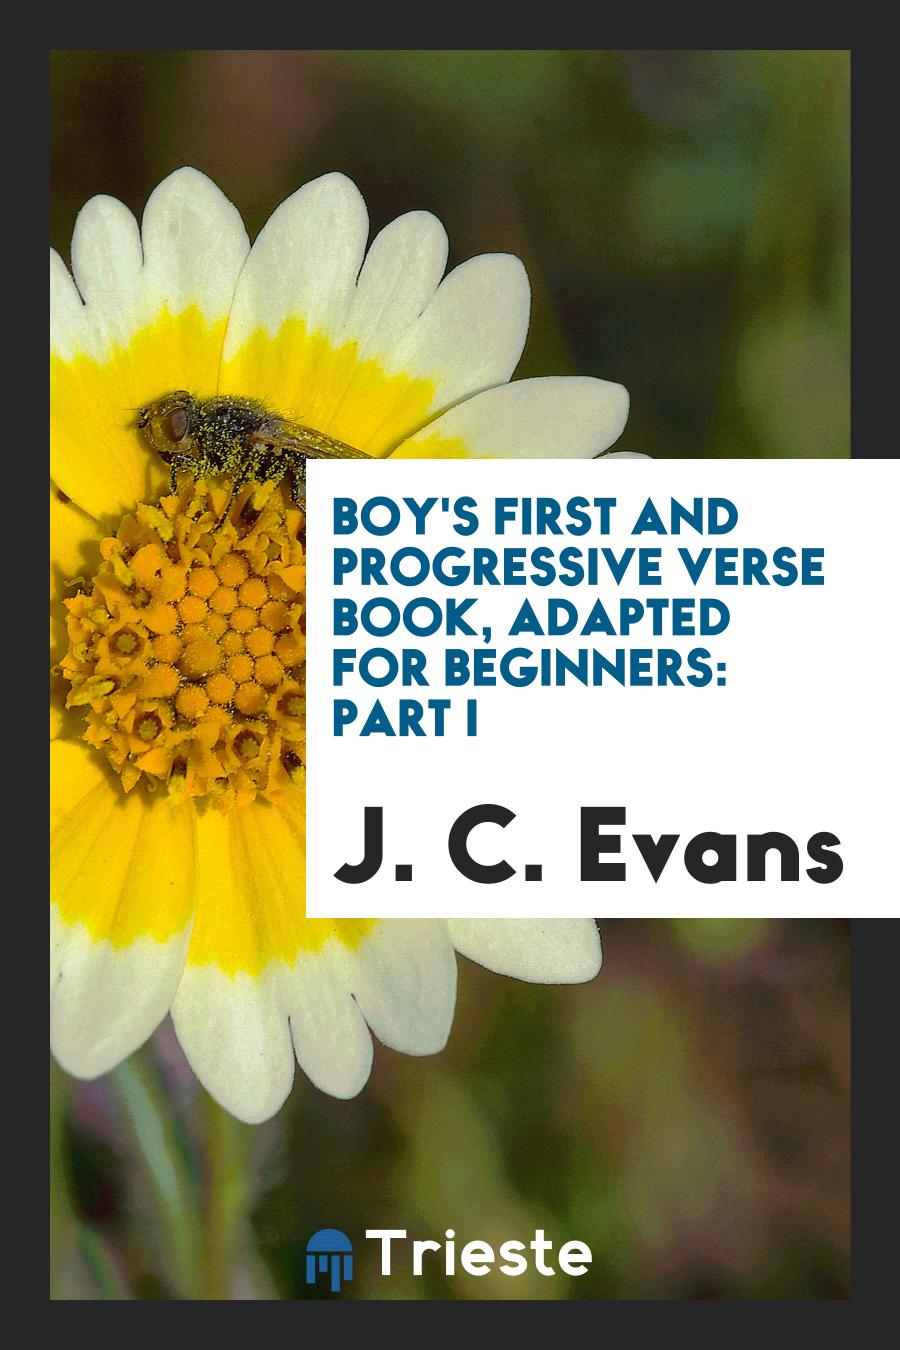 Boy's First and Progressive Verse Book, Adapted for Beginners: Part I